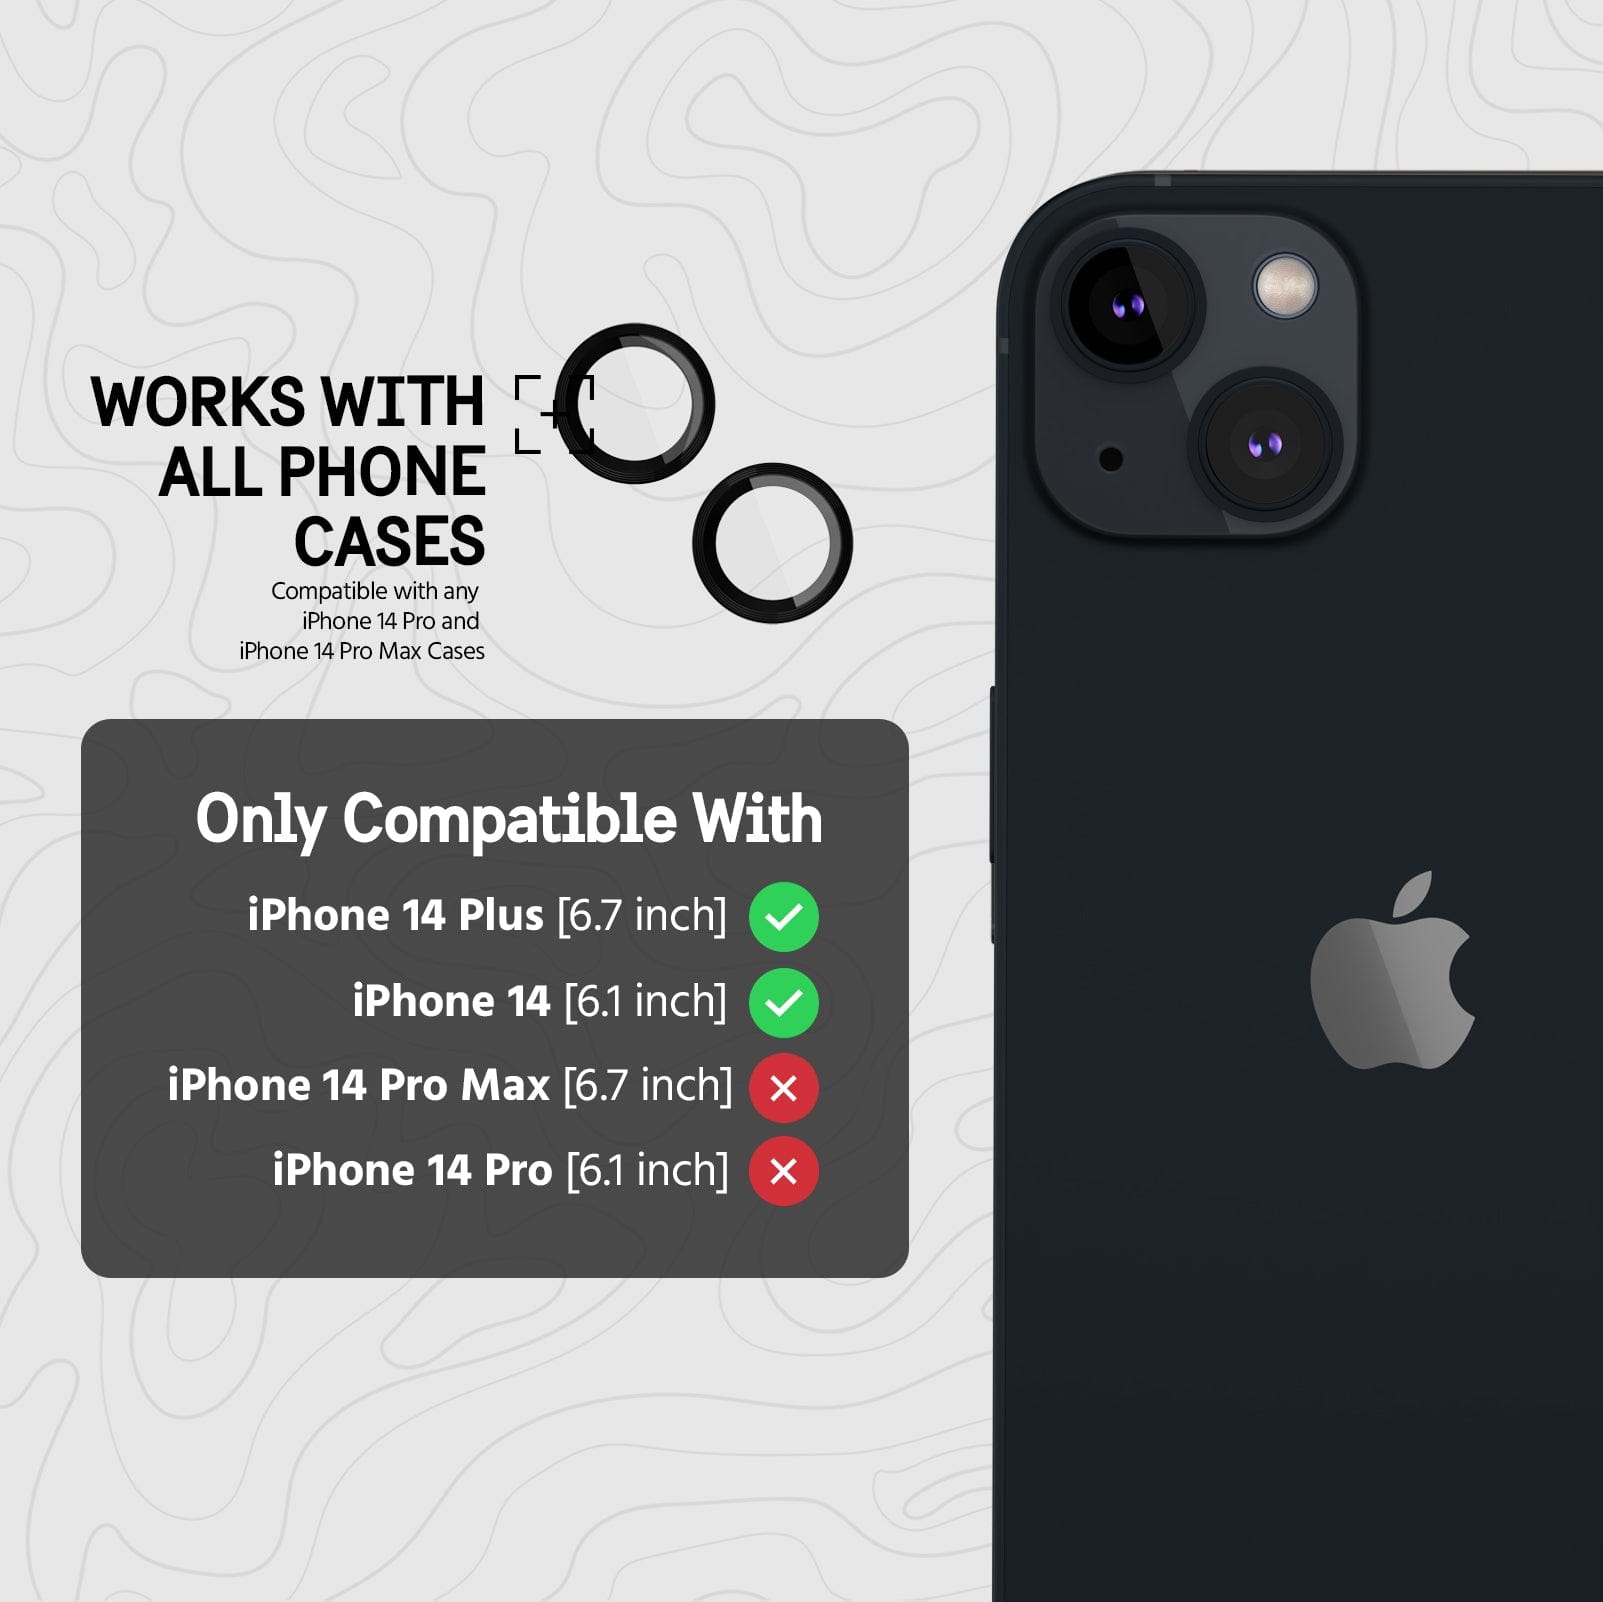 WORKS WITH ALL PHONE CASES. COMPATIBLE WITH ANY IPHONE 14 AND IPHONE 14 PLUS CASES.